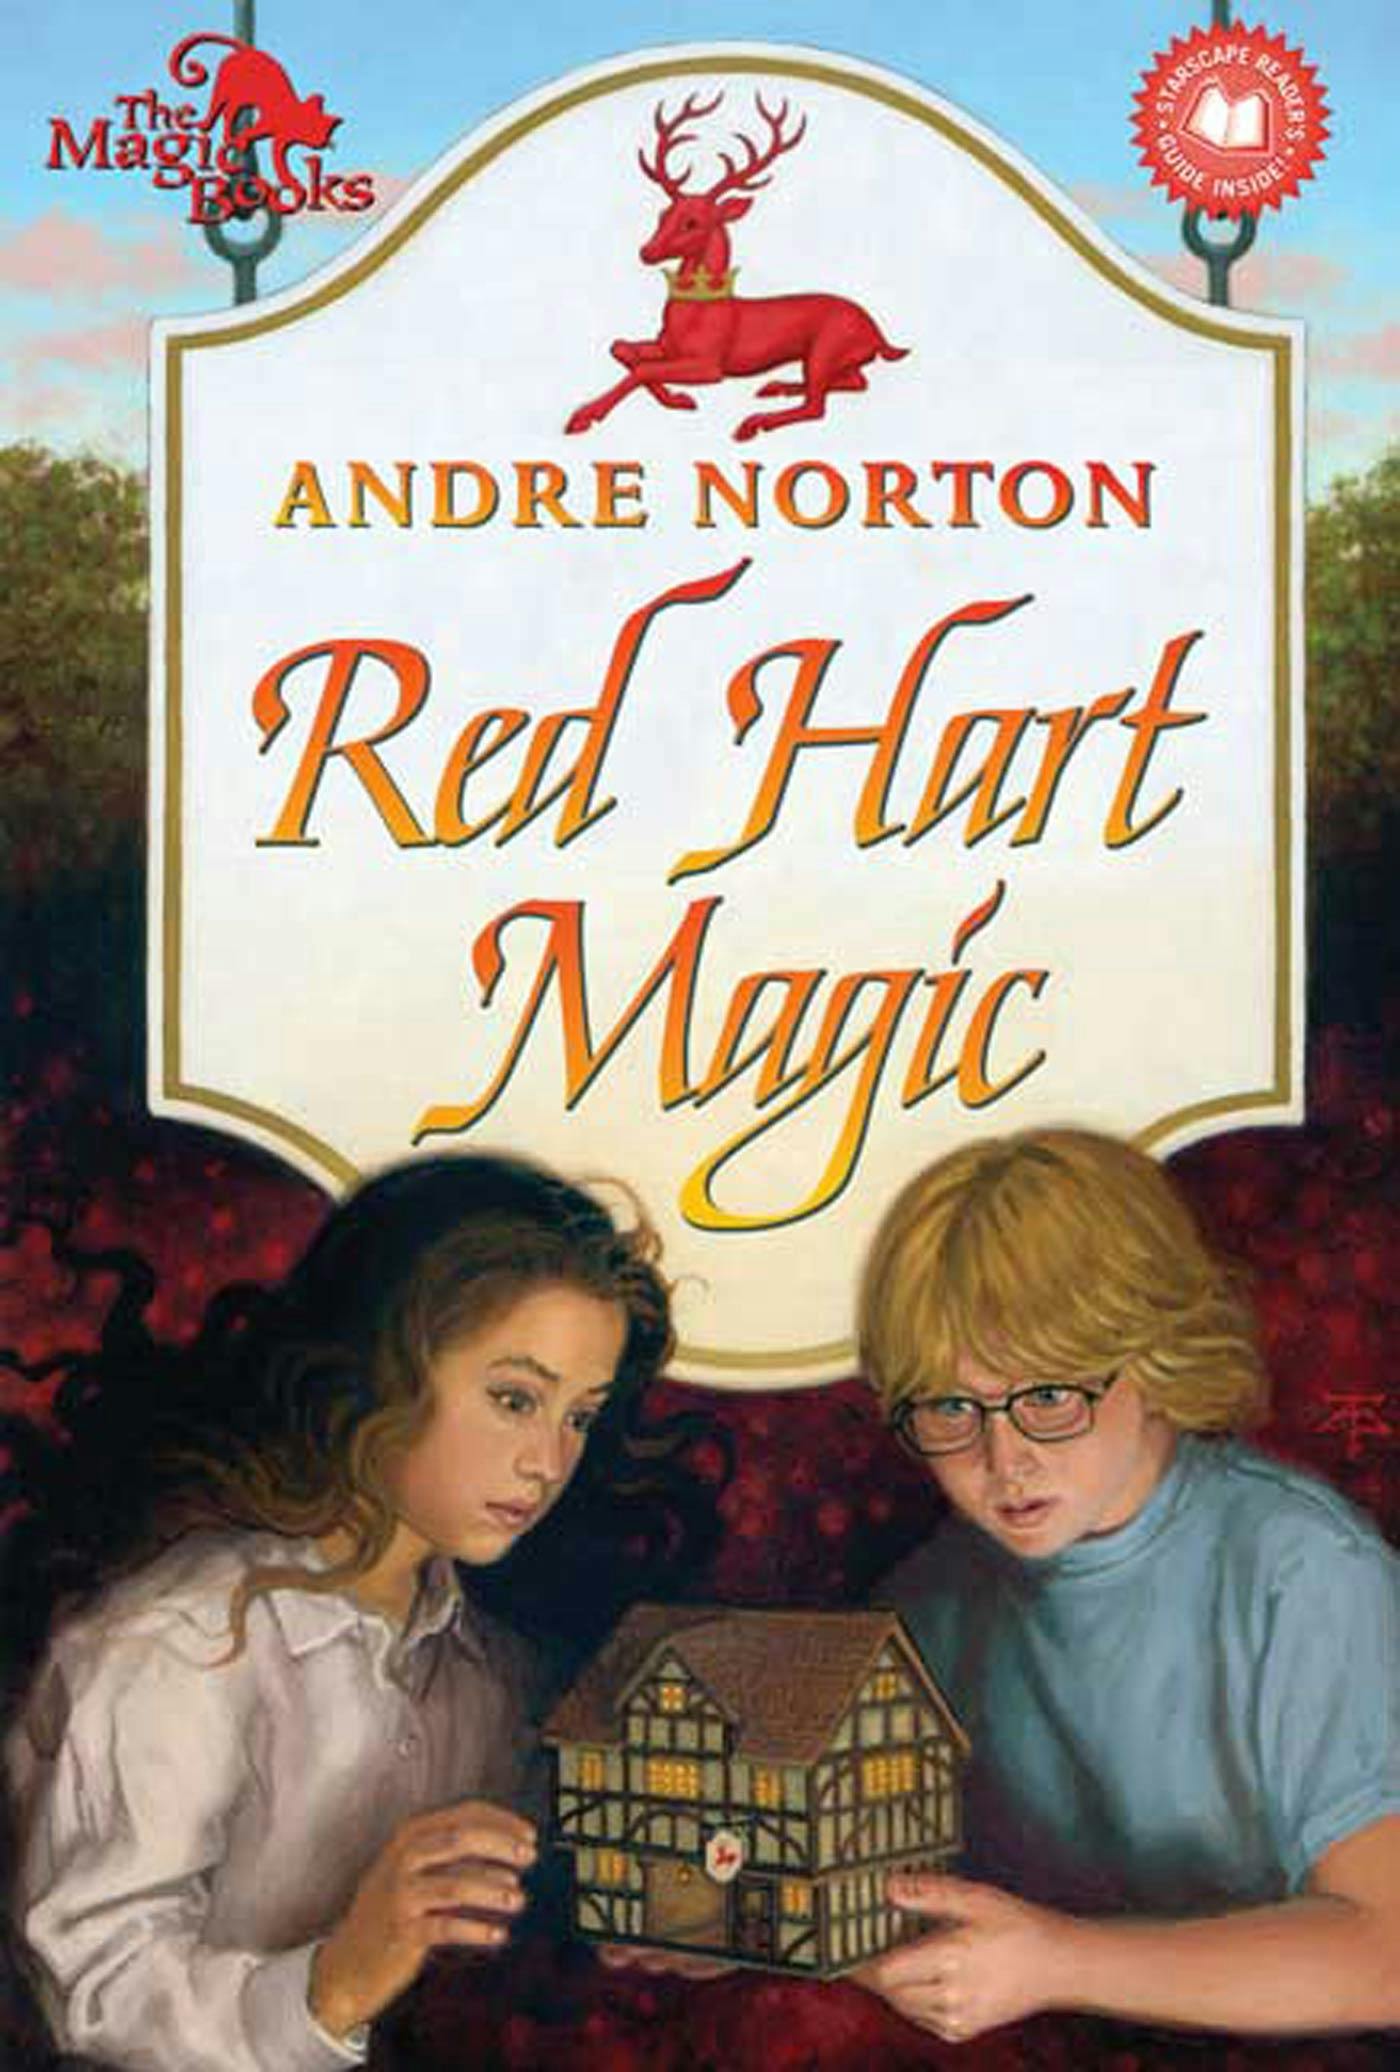 Cover for the book titled as: Red Hart Magic